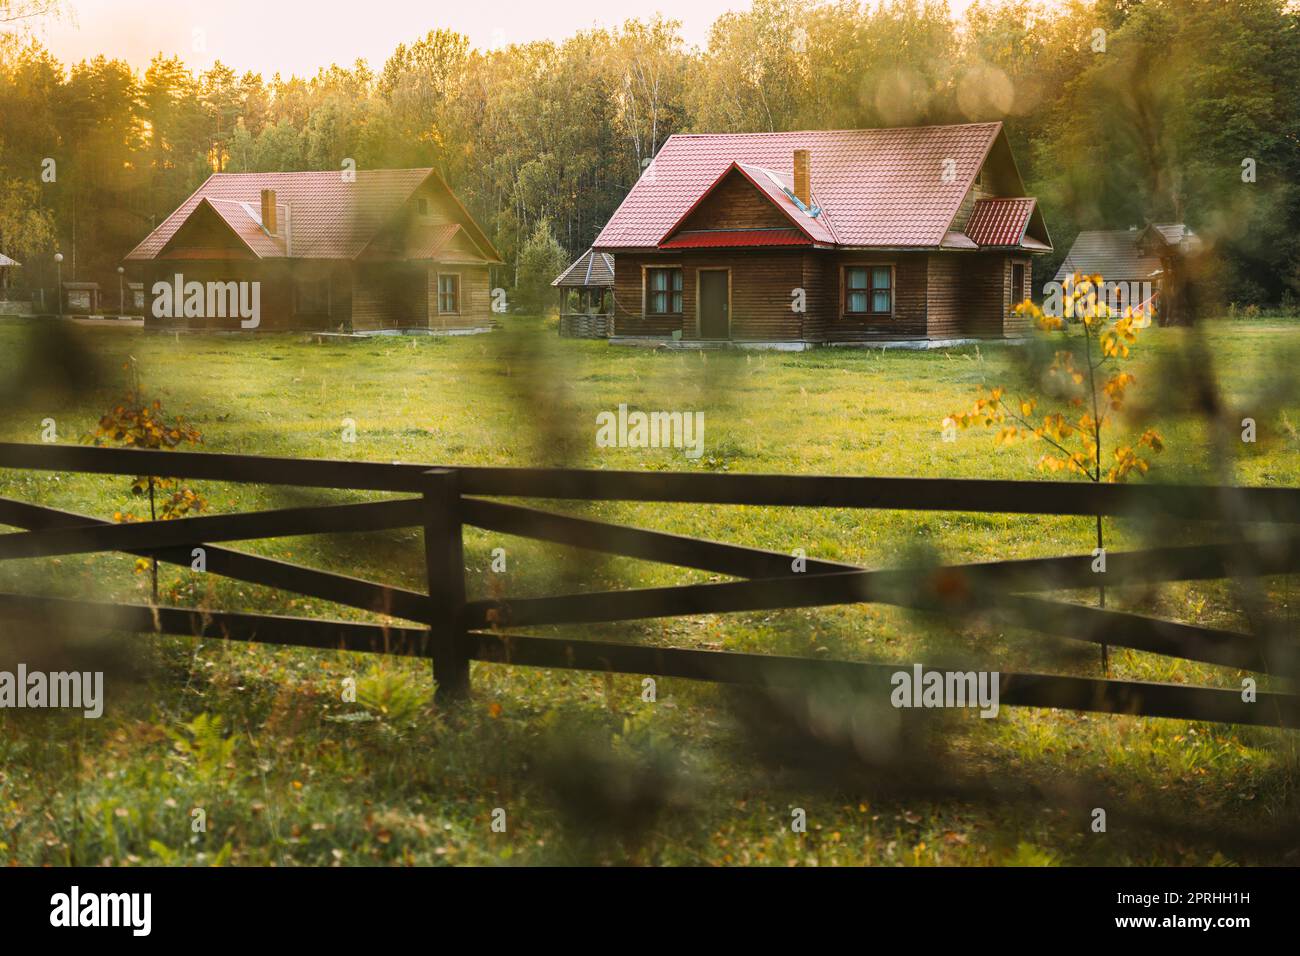 Berezinsky, Biosphere Reserve, Belarus. Traditional Belarusian Tourist Guest Houses In Early Autumn Landscape. Popular Place For Rest And Active Eco-tourism In Belarus Stock Photo